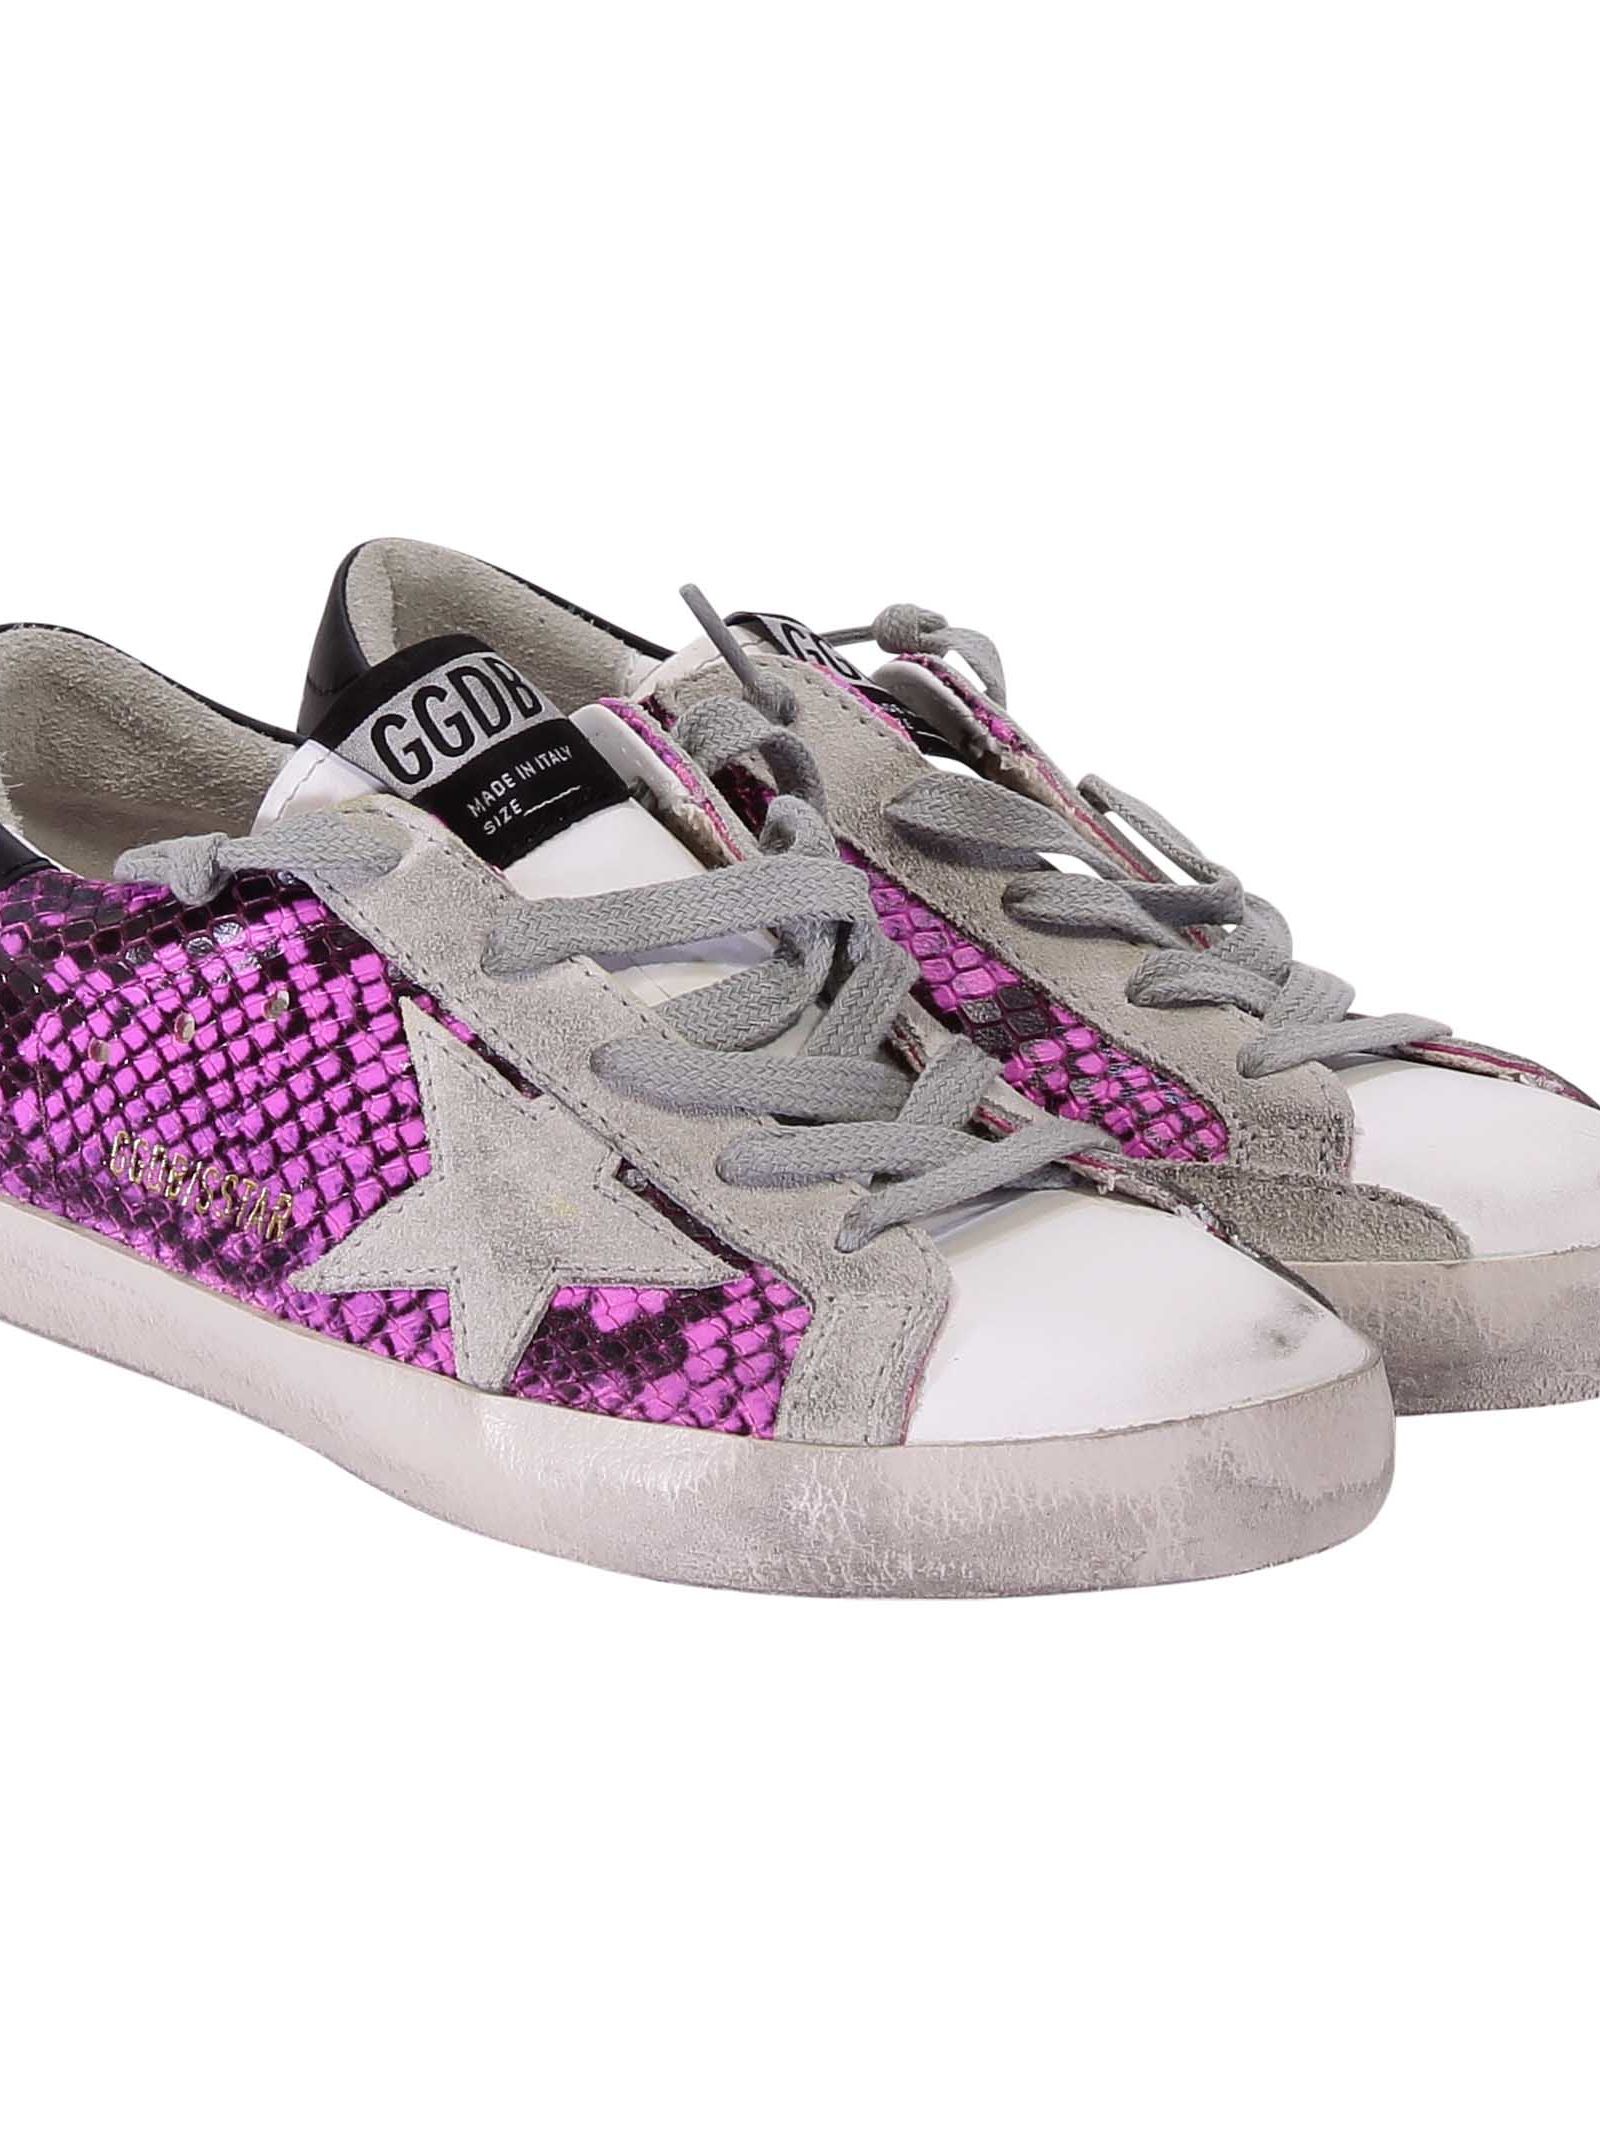 golden goose shoes price